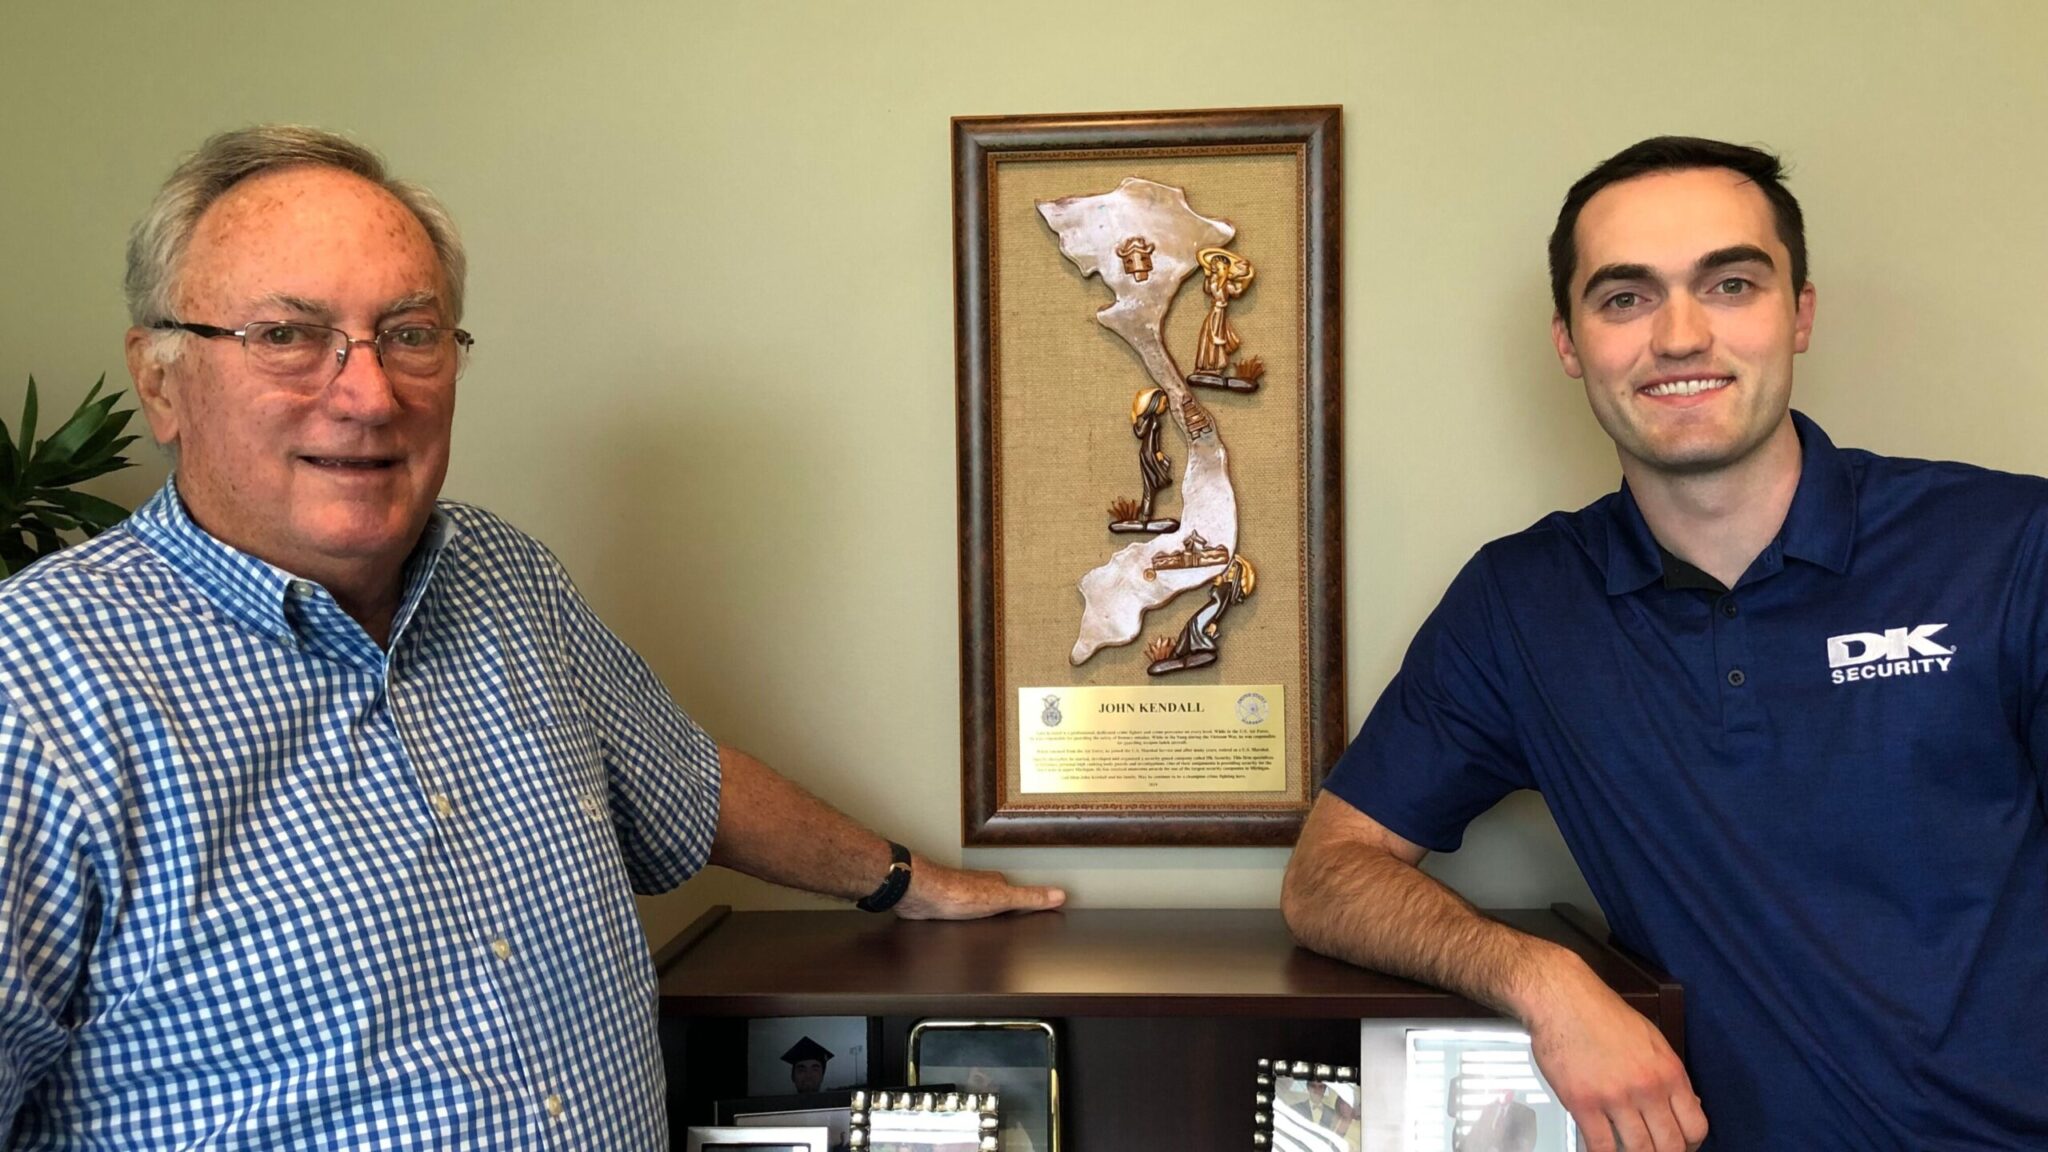 John Kendall and Johnny Kendall pose for a photo at DK Security corporate headquarters in front of a wall-mounted award recognizing John Kendall's career in the U.S. Marshals.